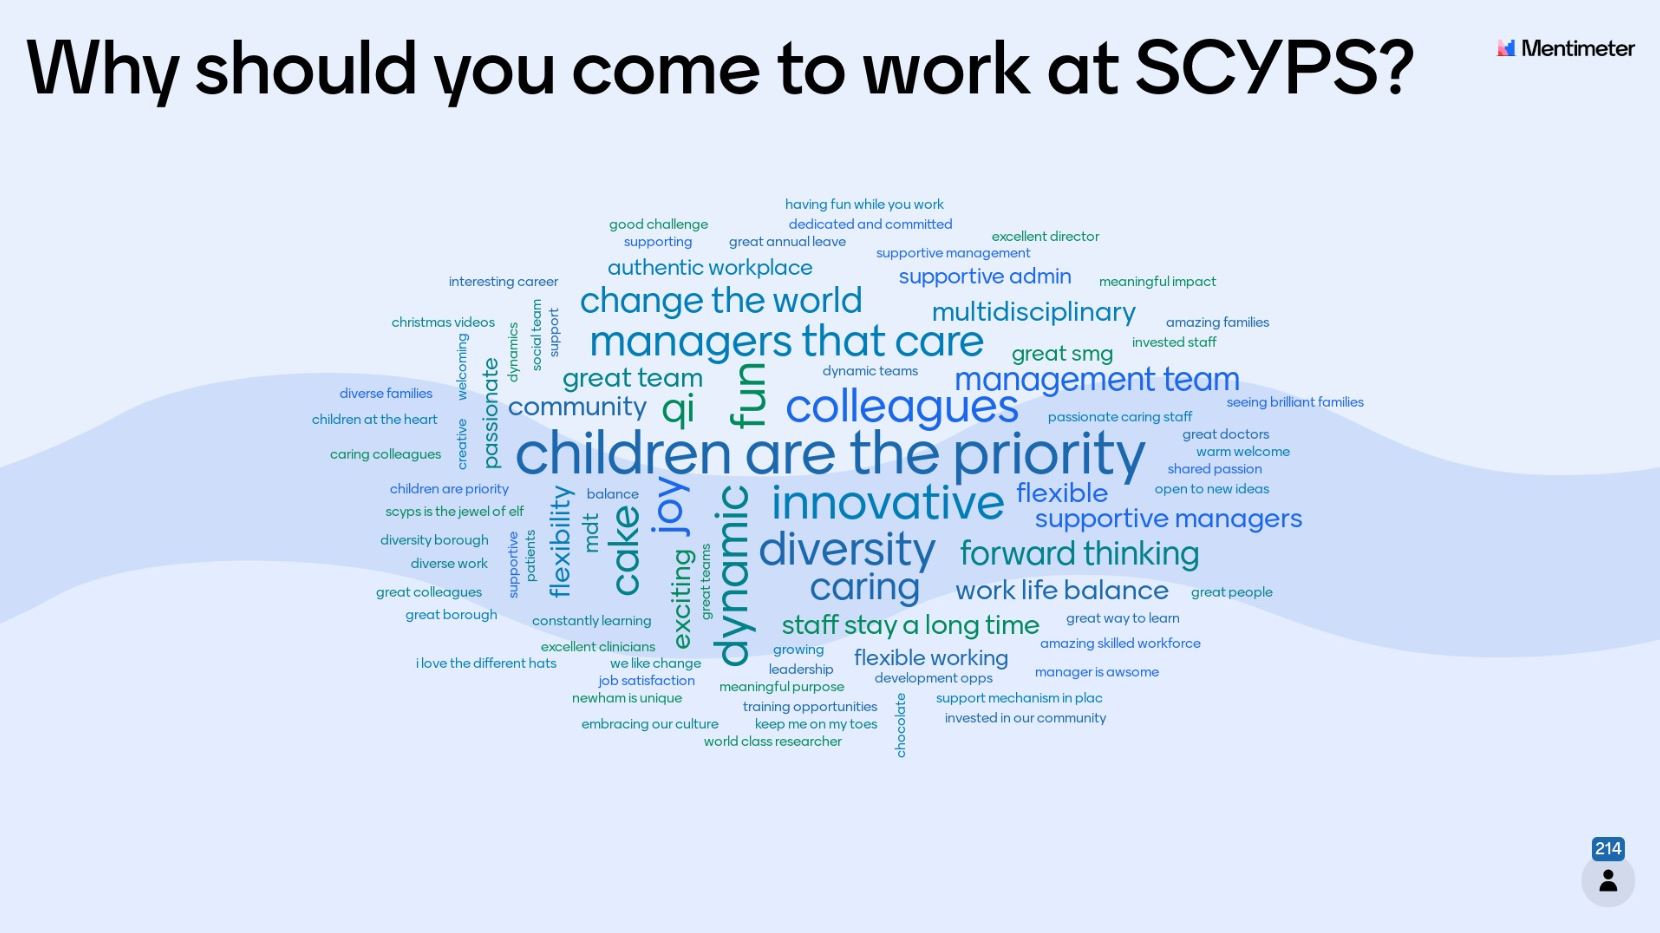 Why should you work at SCPYS?